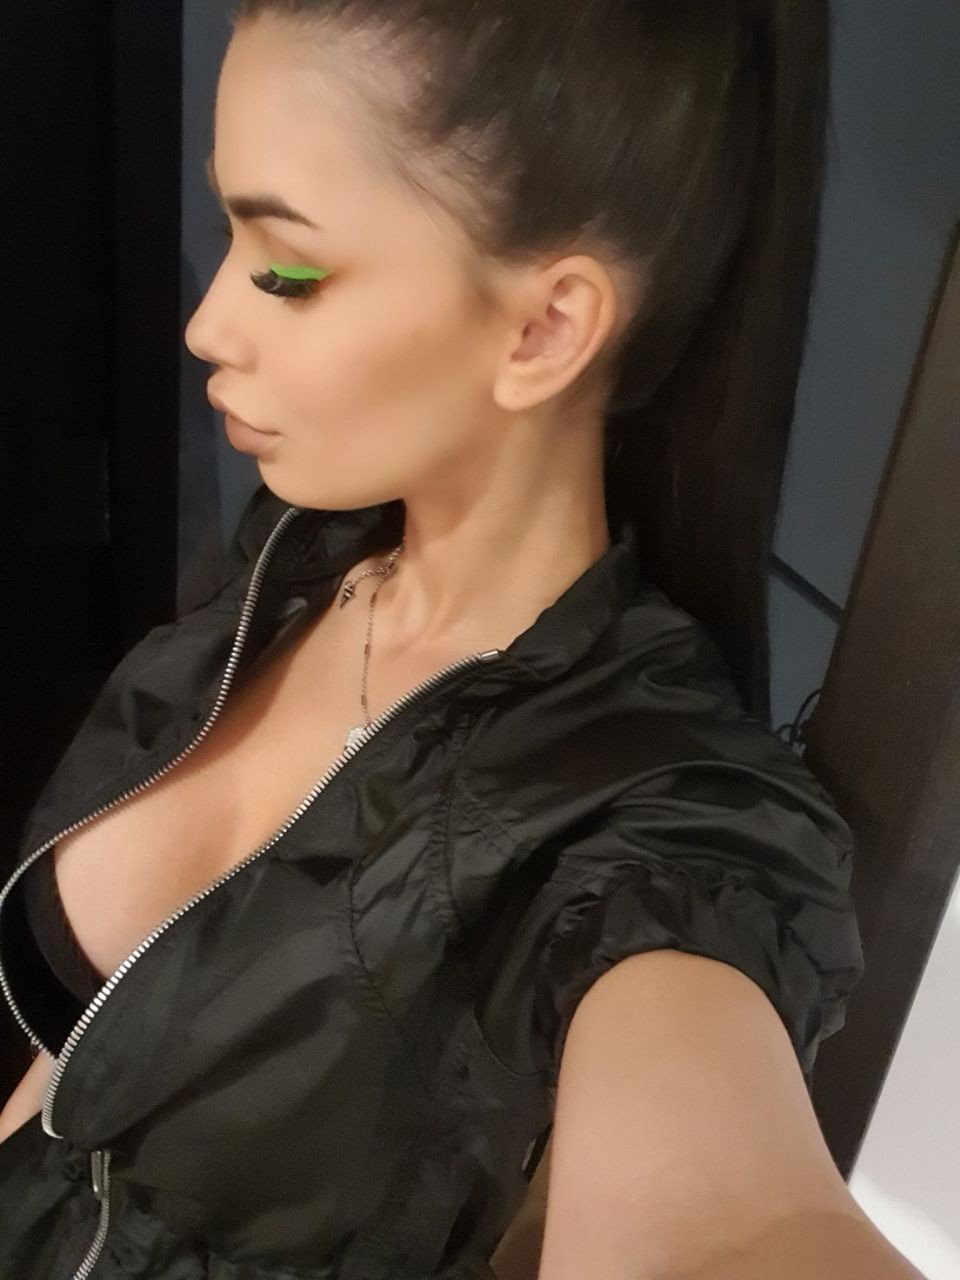 Photo by SereneSophie with the username @SereneSophie, who is a star user,  August 2, 2019 at 7:50 PM and the text says '#lingerie #hotbody #beautiful #sexyeyes #brunette

Sexy black outfit and neon green touches⁉ Yeah baby it's #Friday💥Be naughty and let's have some👉👌fun today on&on @ https://bit.ly/SereneSophie💦'